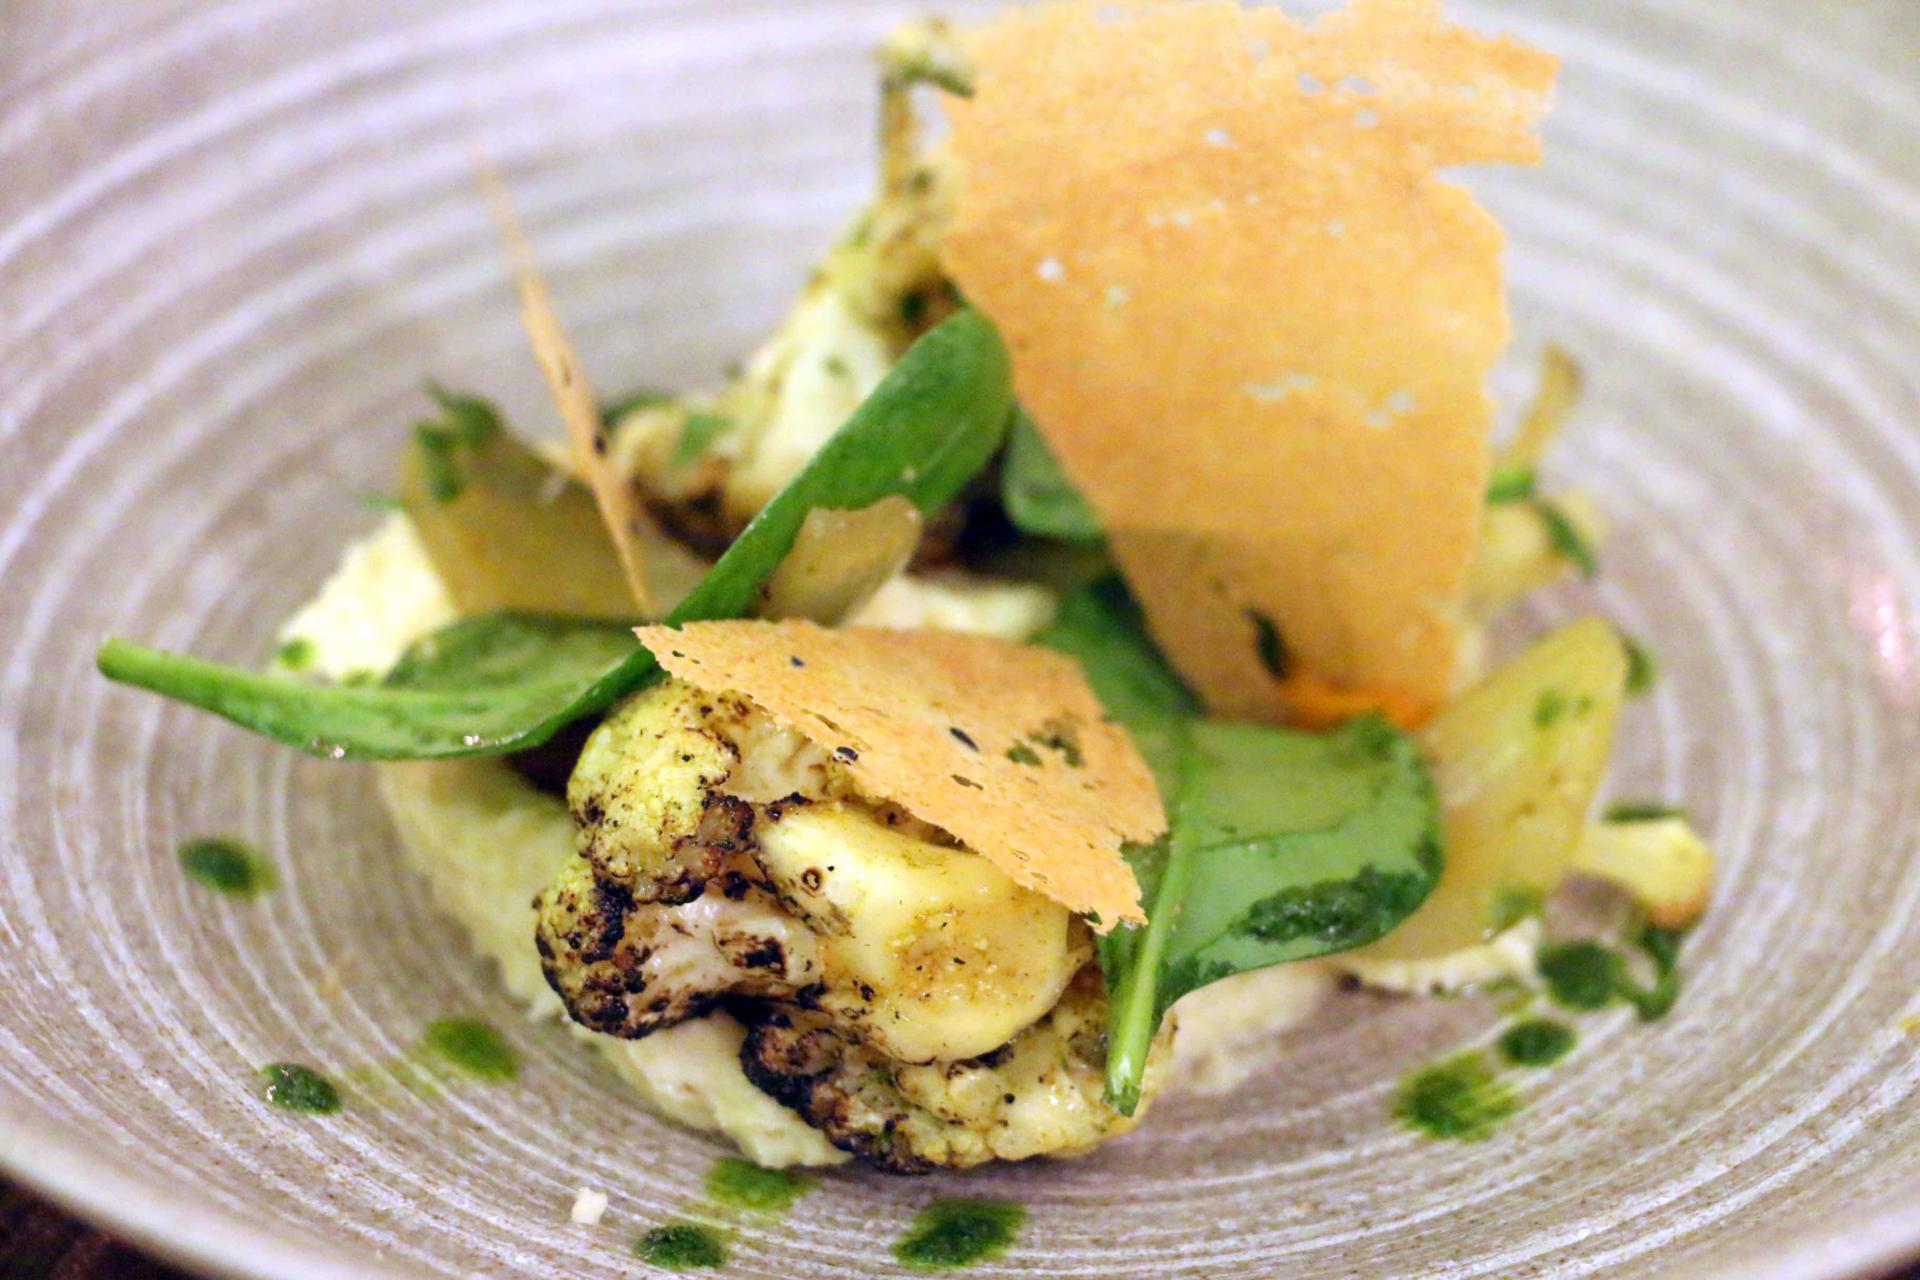 Picture Restaurant Review: Tasting Menu Excitement in the Heart of Marylebone